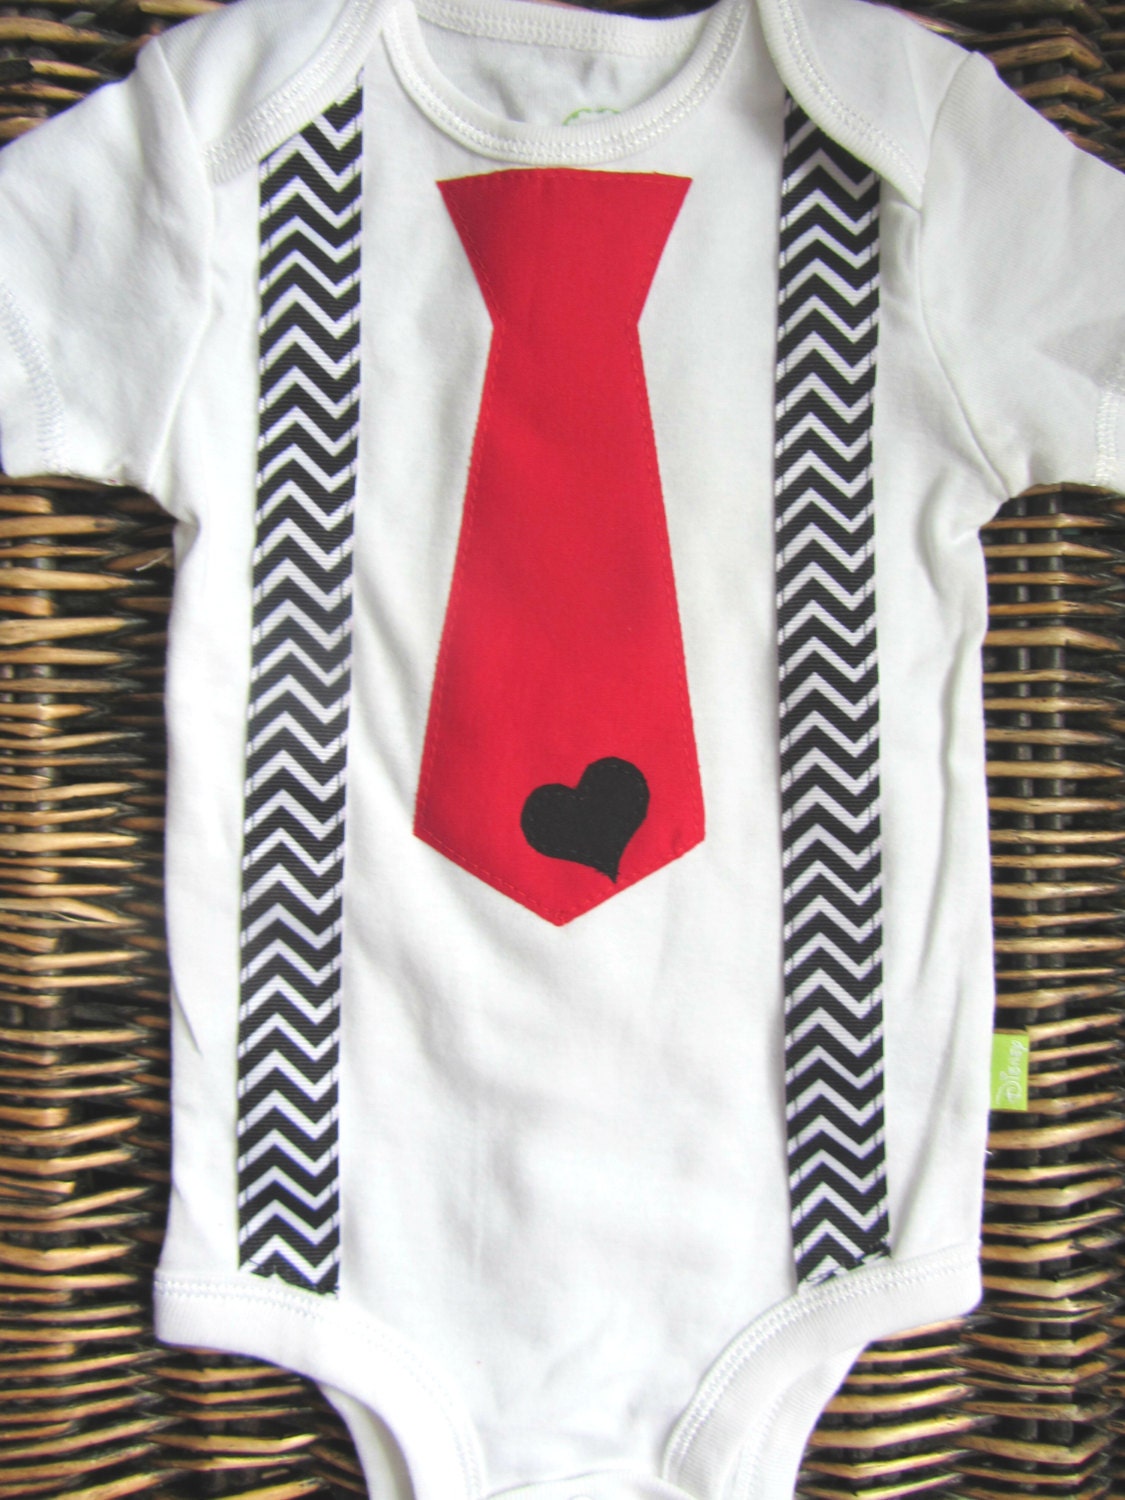 Baby Boy Clothes Black Chevron Suspenders and Red Tie Outfit1125 x 1500